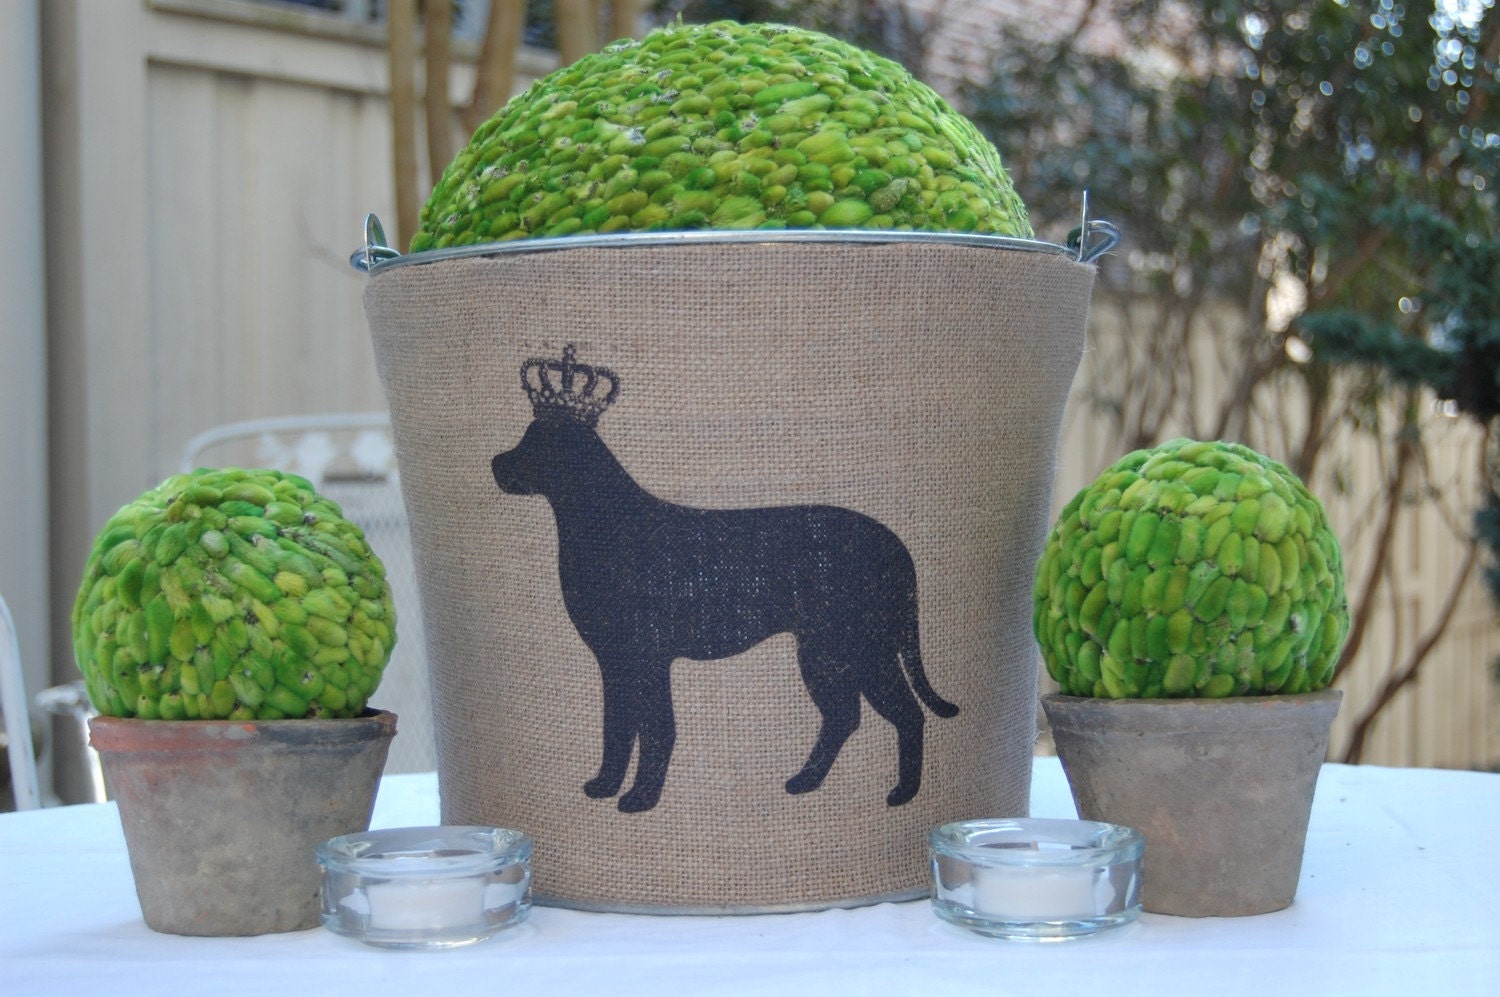 Custom Burlap Covered Galvanized Bucket Pail with Black Lab......OR monogram for wedding OR home....Unique hostess or birthday gift.